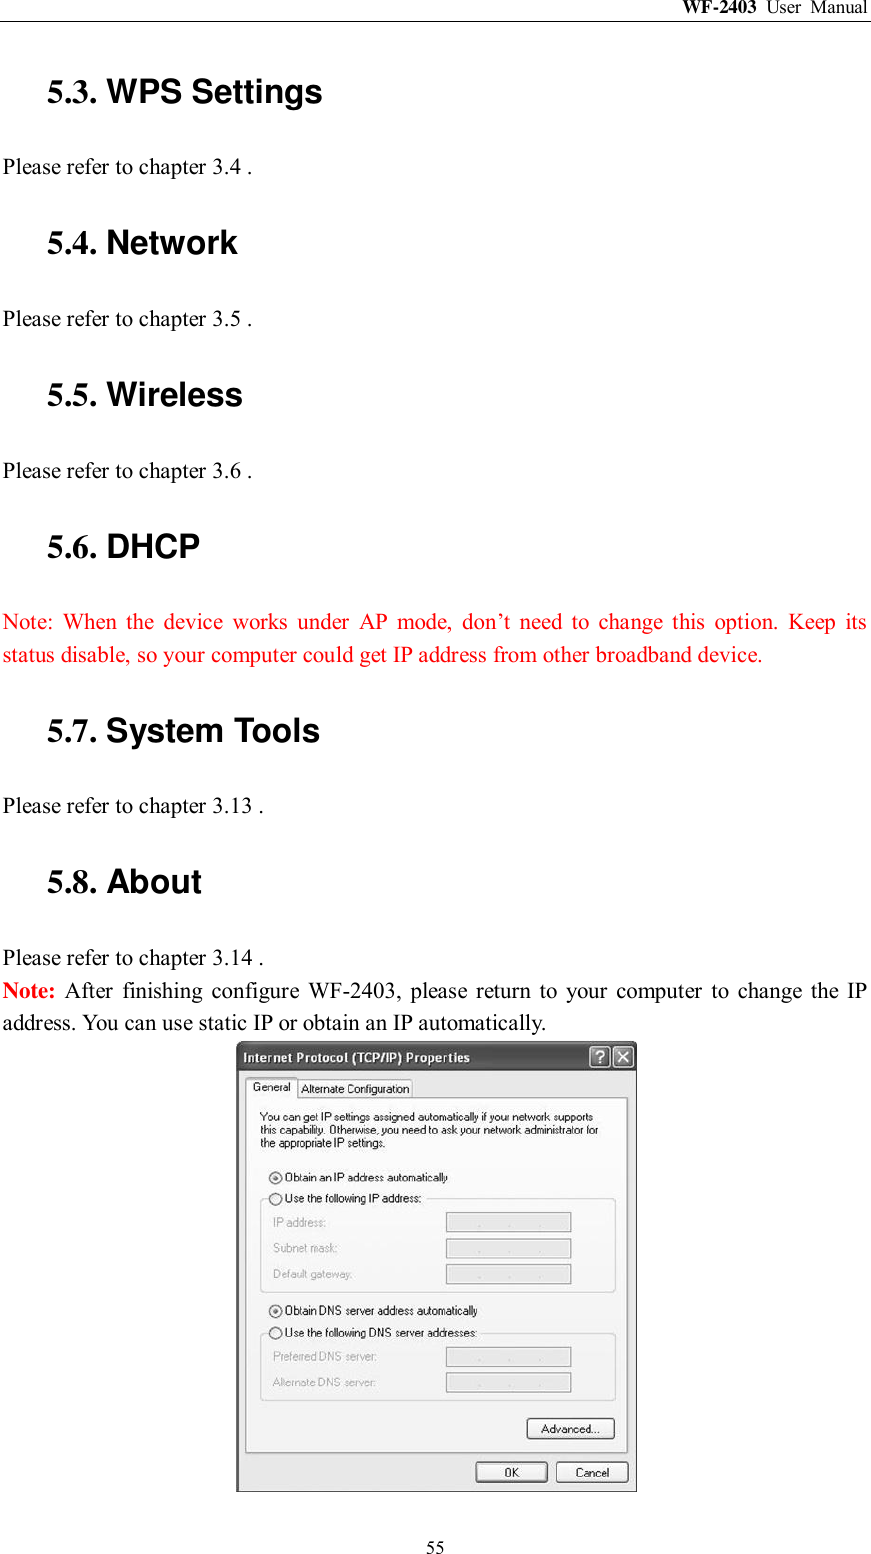 WF-2403  User  Manual  55 5.3. WPS Settings Please refer to chapter 3.4 . 5.4. Network Please refer to chapter 3.5 . 5.5. Wireless Please refer to chapter 3.6 . 5.6. DHCP Note:  When  the  device  works  under  AP  mode,  don‟t  need  to  change  this  option.  Keep  its status disable, so your computer could get IP address from other broadband device. 5.7. System Tools Please refer to chapter 3.13 . 5.8. About Please refer to chapter 3.14 . Note: After  finishing  configure  WF-2403,  please  return  to  your  computer  to  change  the  IP address. You can use static IP or obtain an IP automatically.  